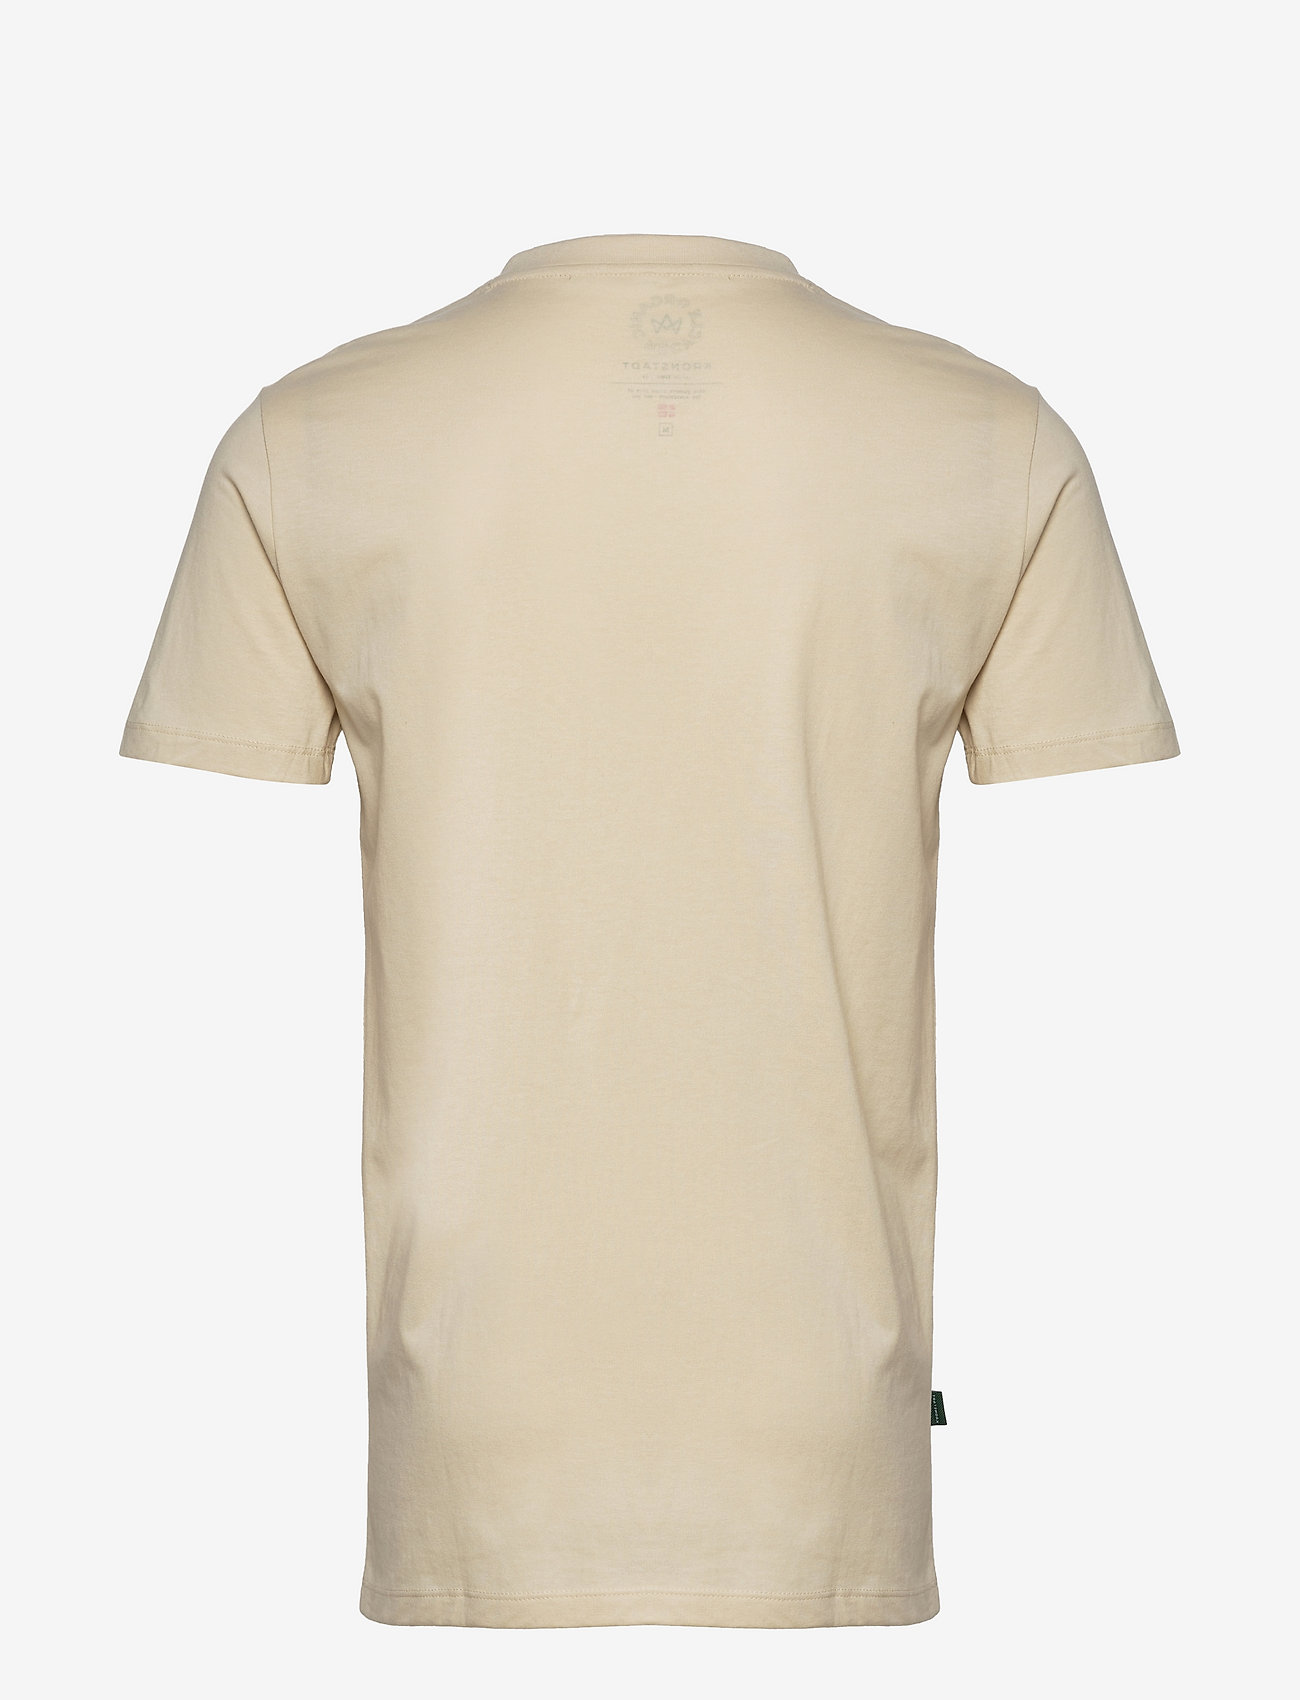 Kronstadt - Timmi Organic/Recycled t-shirt - off white - 1